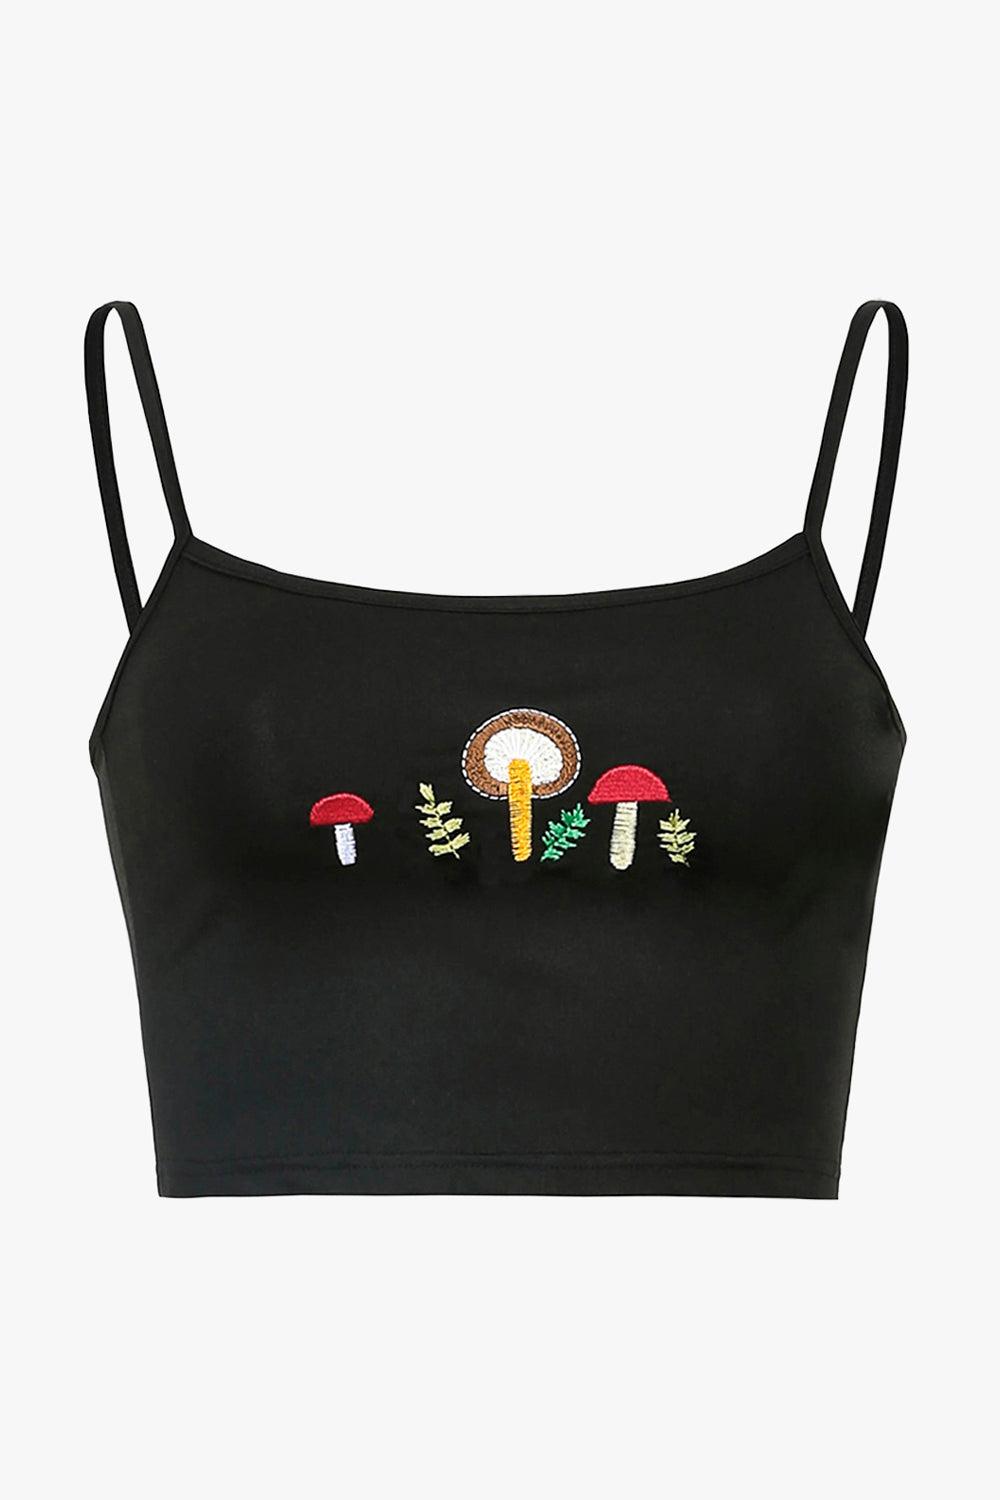 Forest Mushrooms Crop Top - Aesthetic Clothes Shop